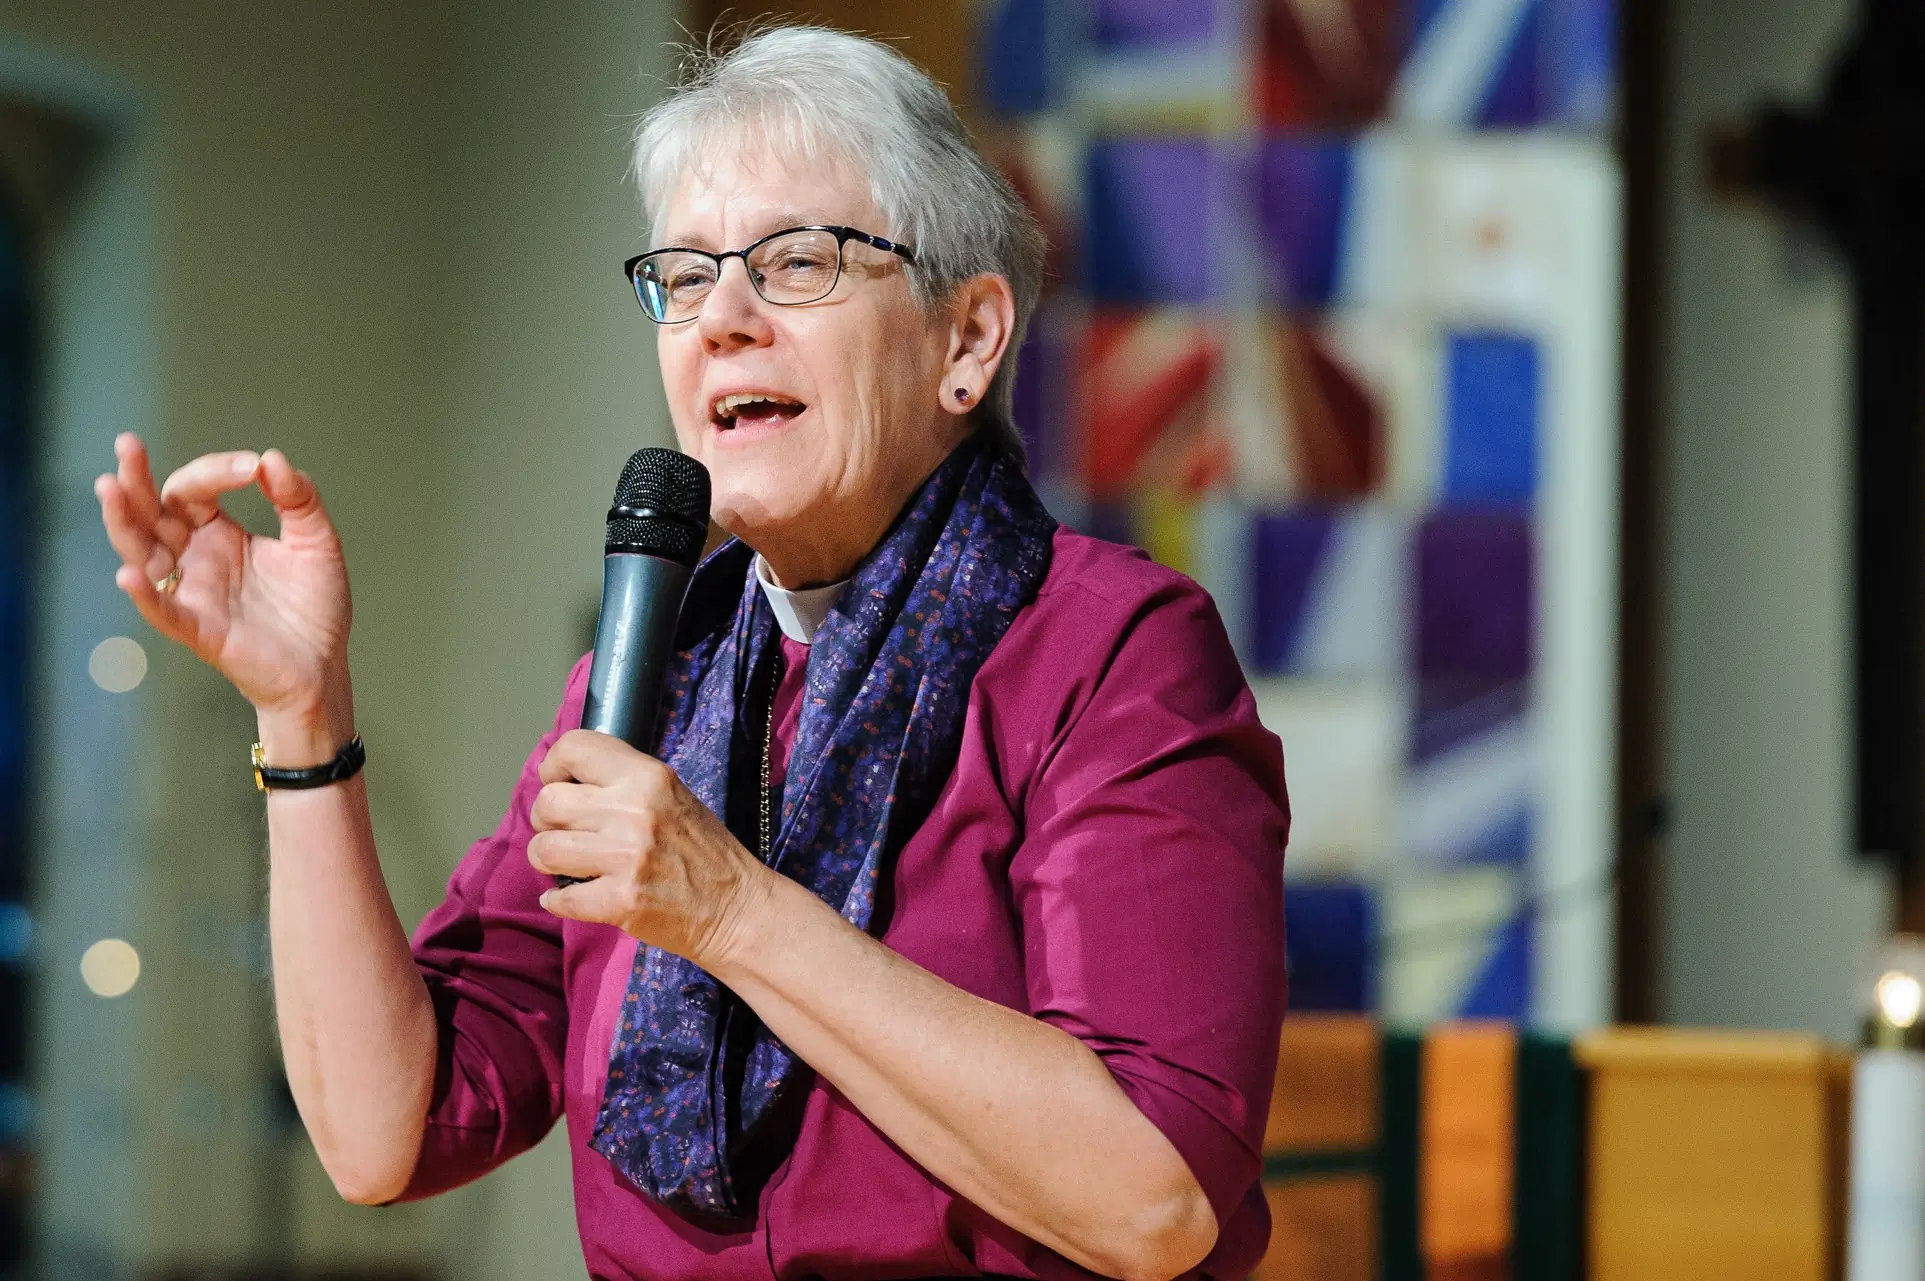 Bishop Linda Nicholls was elected as primate of the Anglican Church of Canada in July